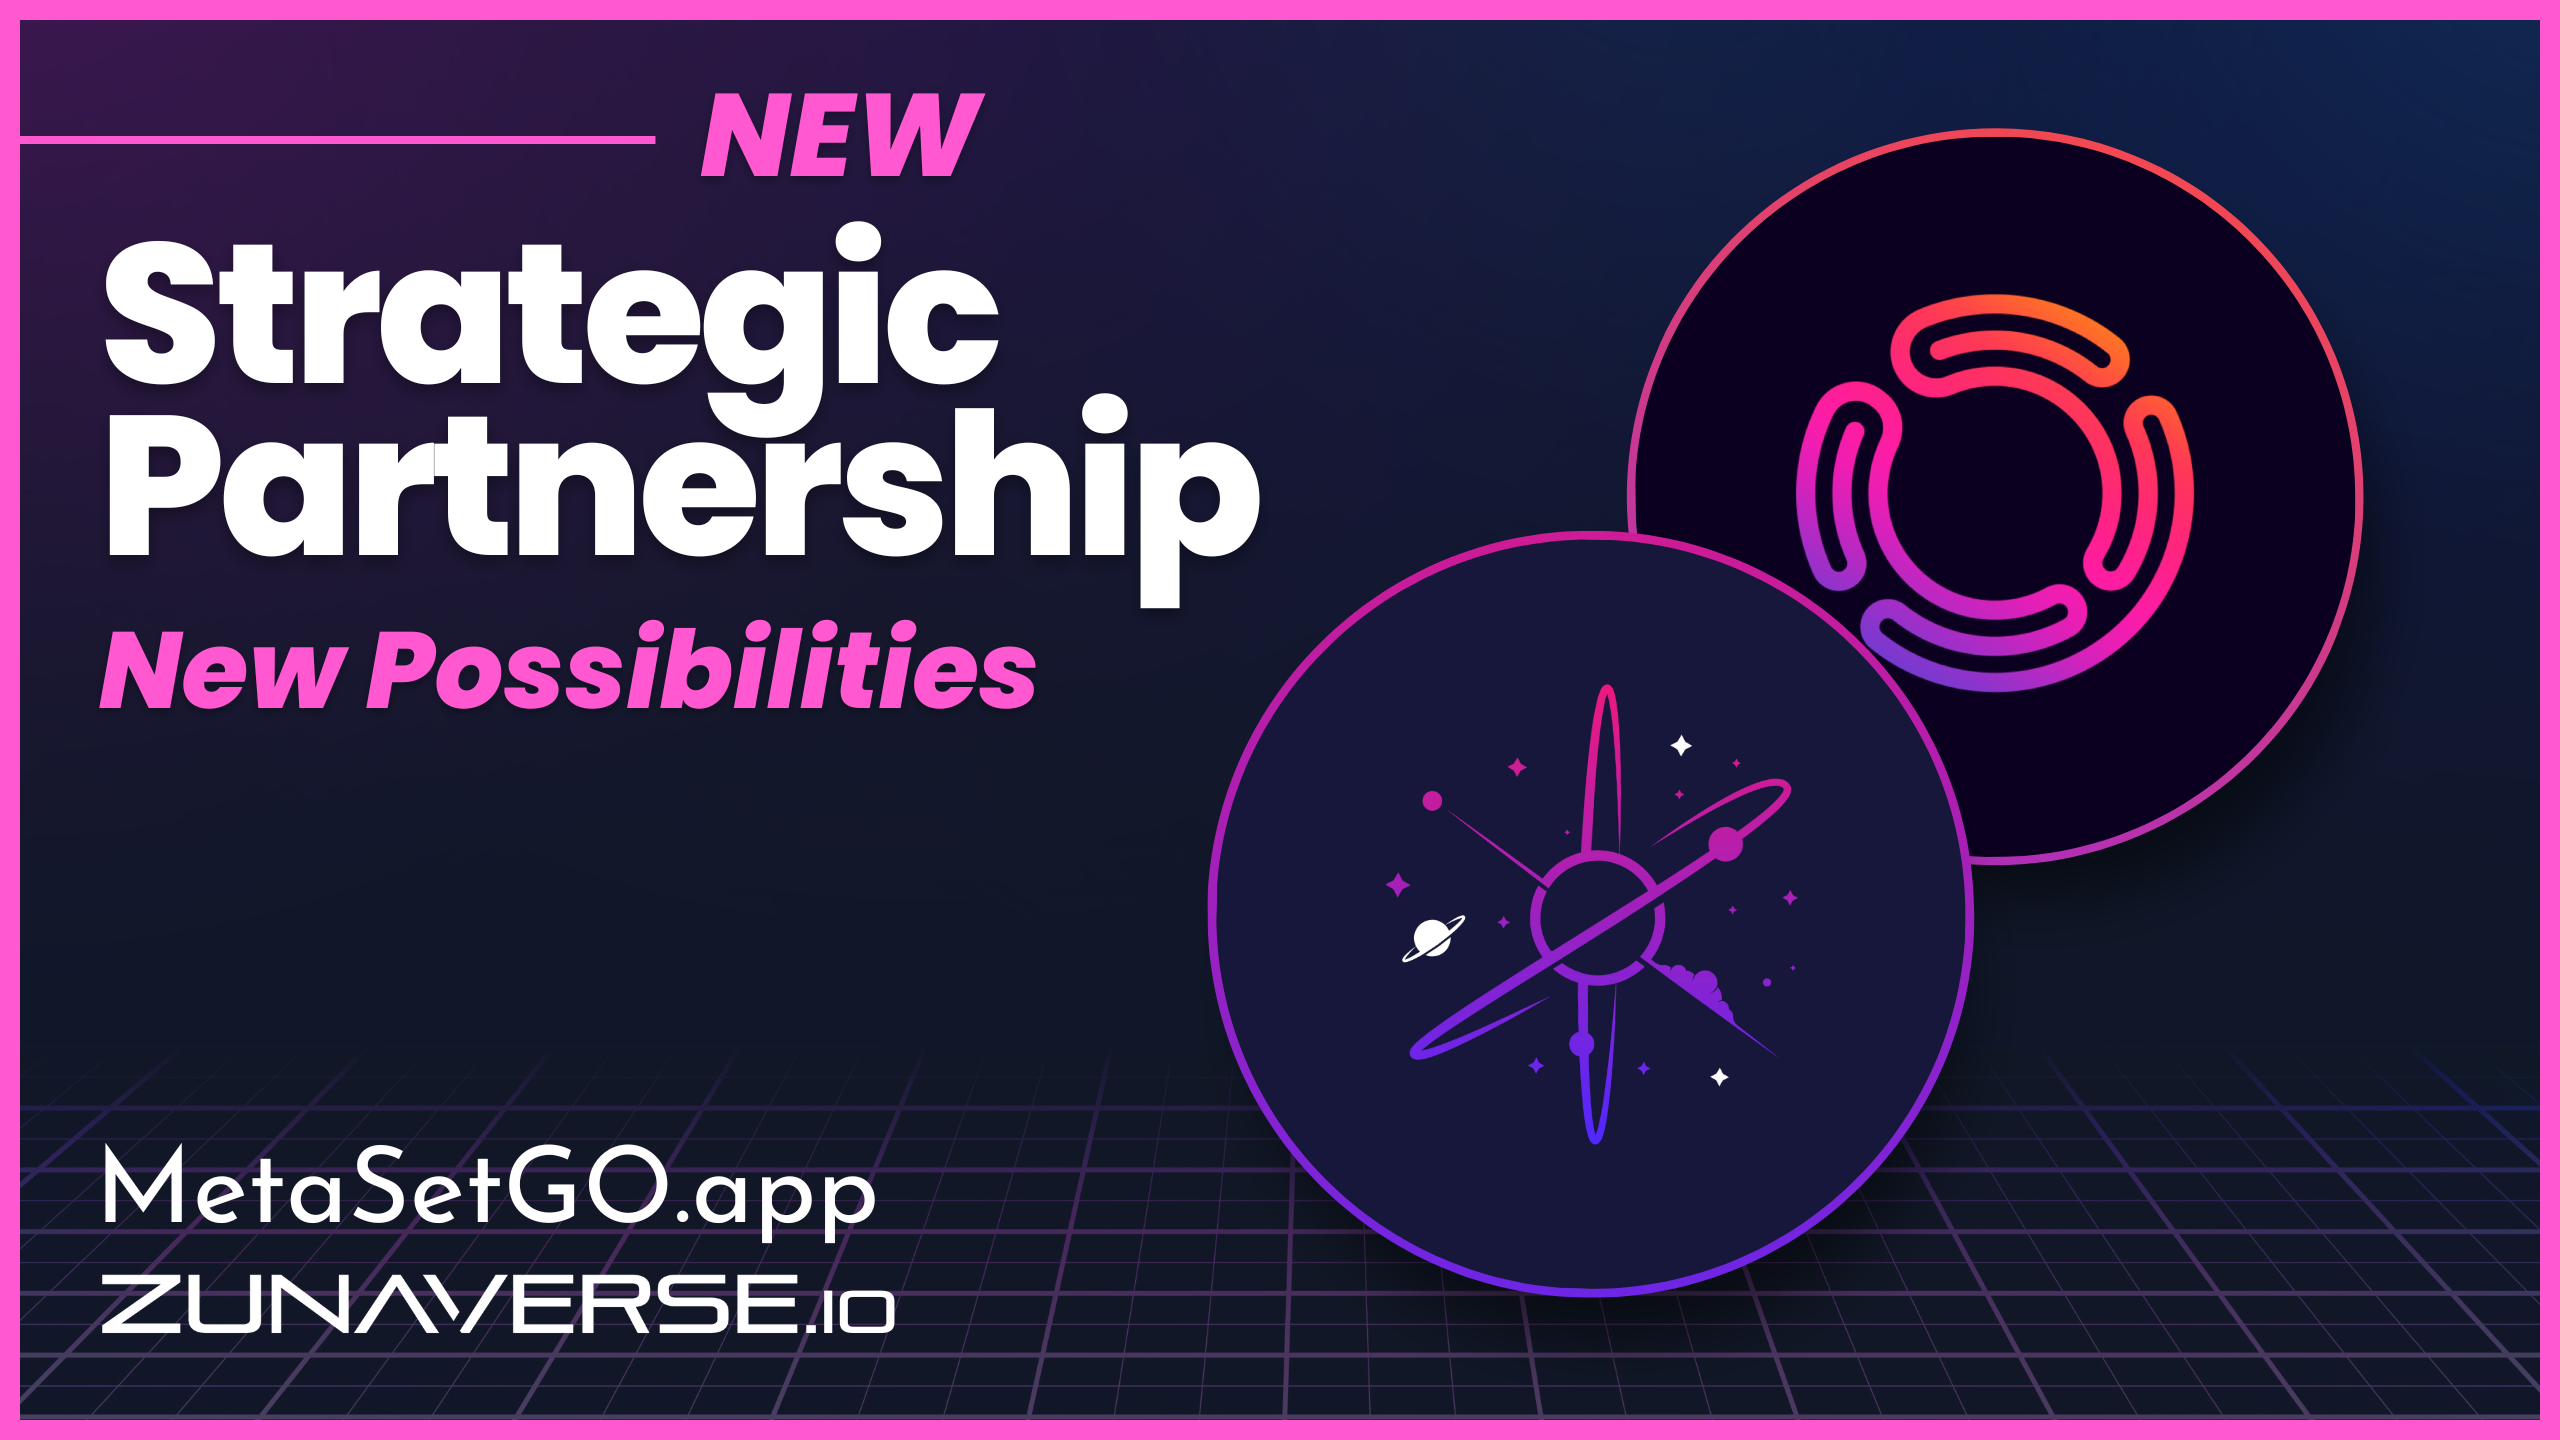 , ZUNAVERSE.io and MetaSetGO Team Up to Bring Next-Level NFT and Mobile Gaming Innovation